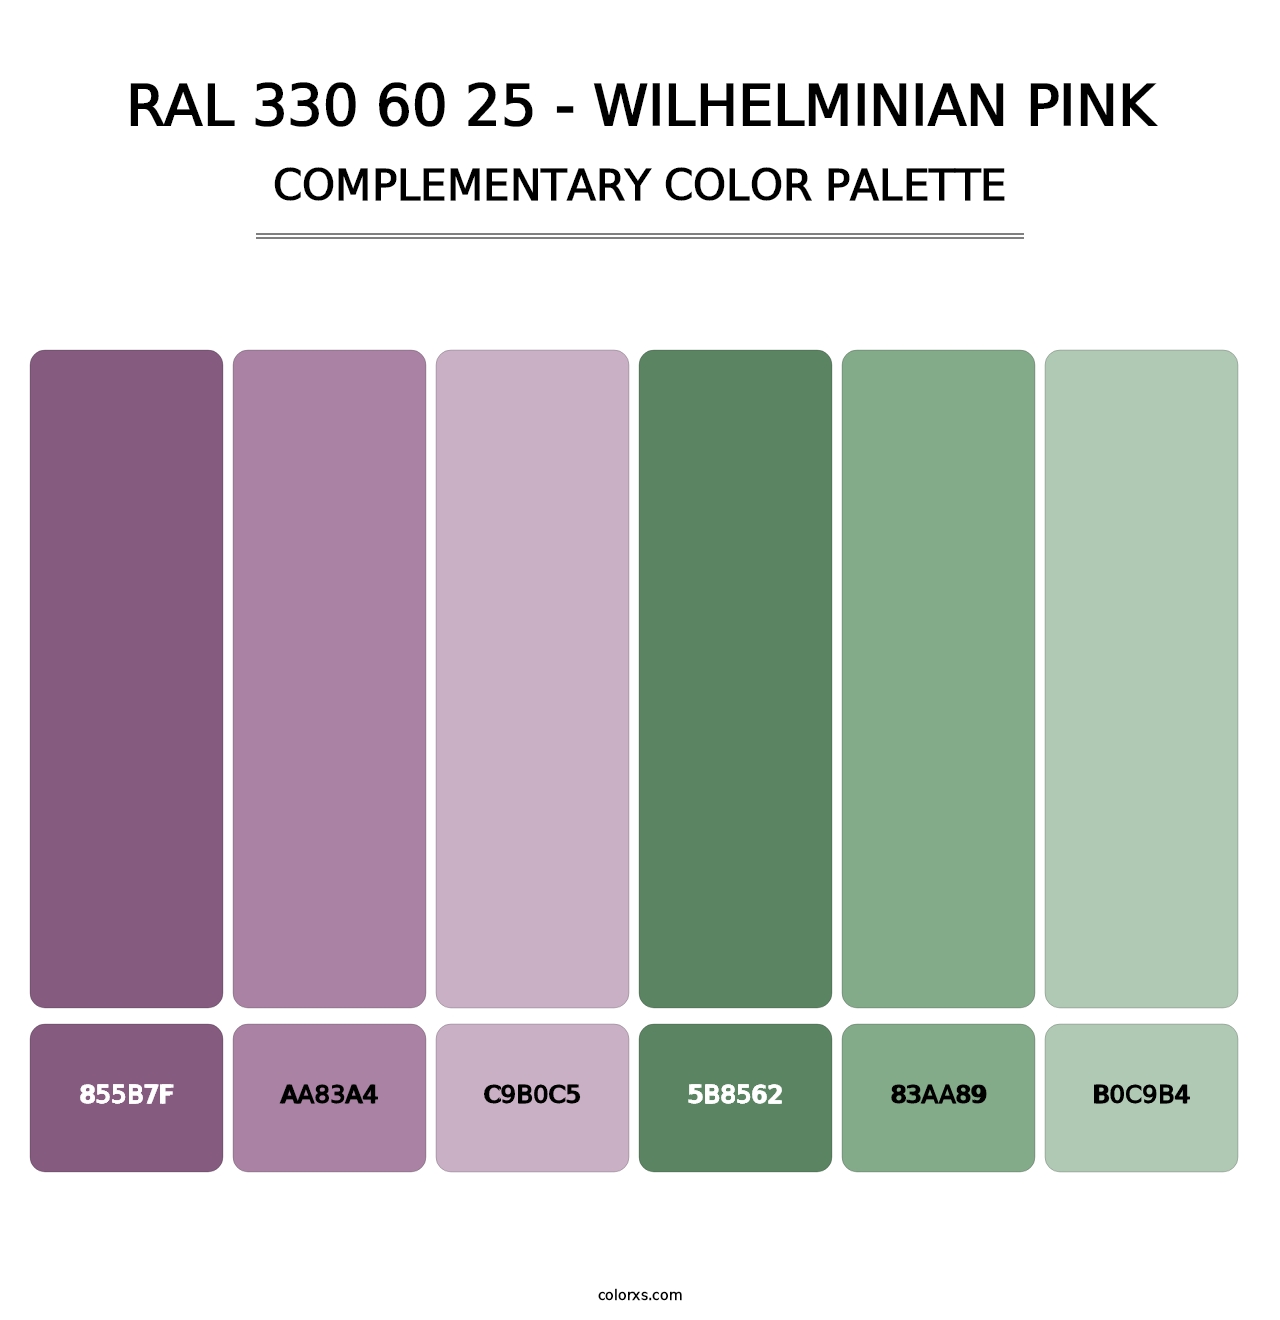 RAL 330 60 25 - Wilhelminian Pink - Complementary Color Palette